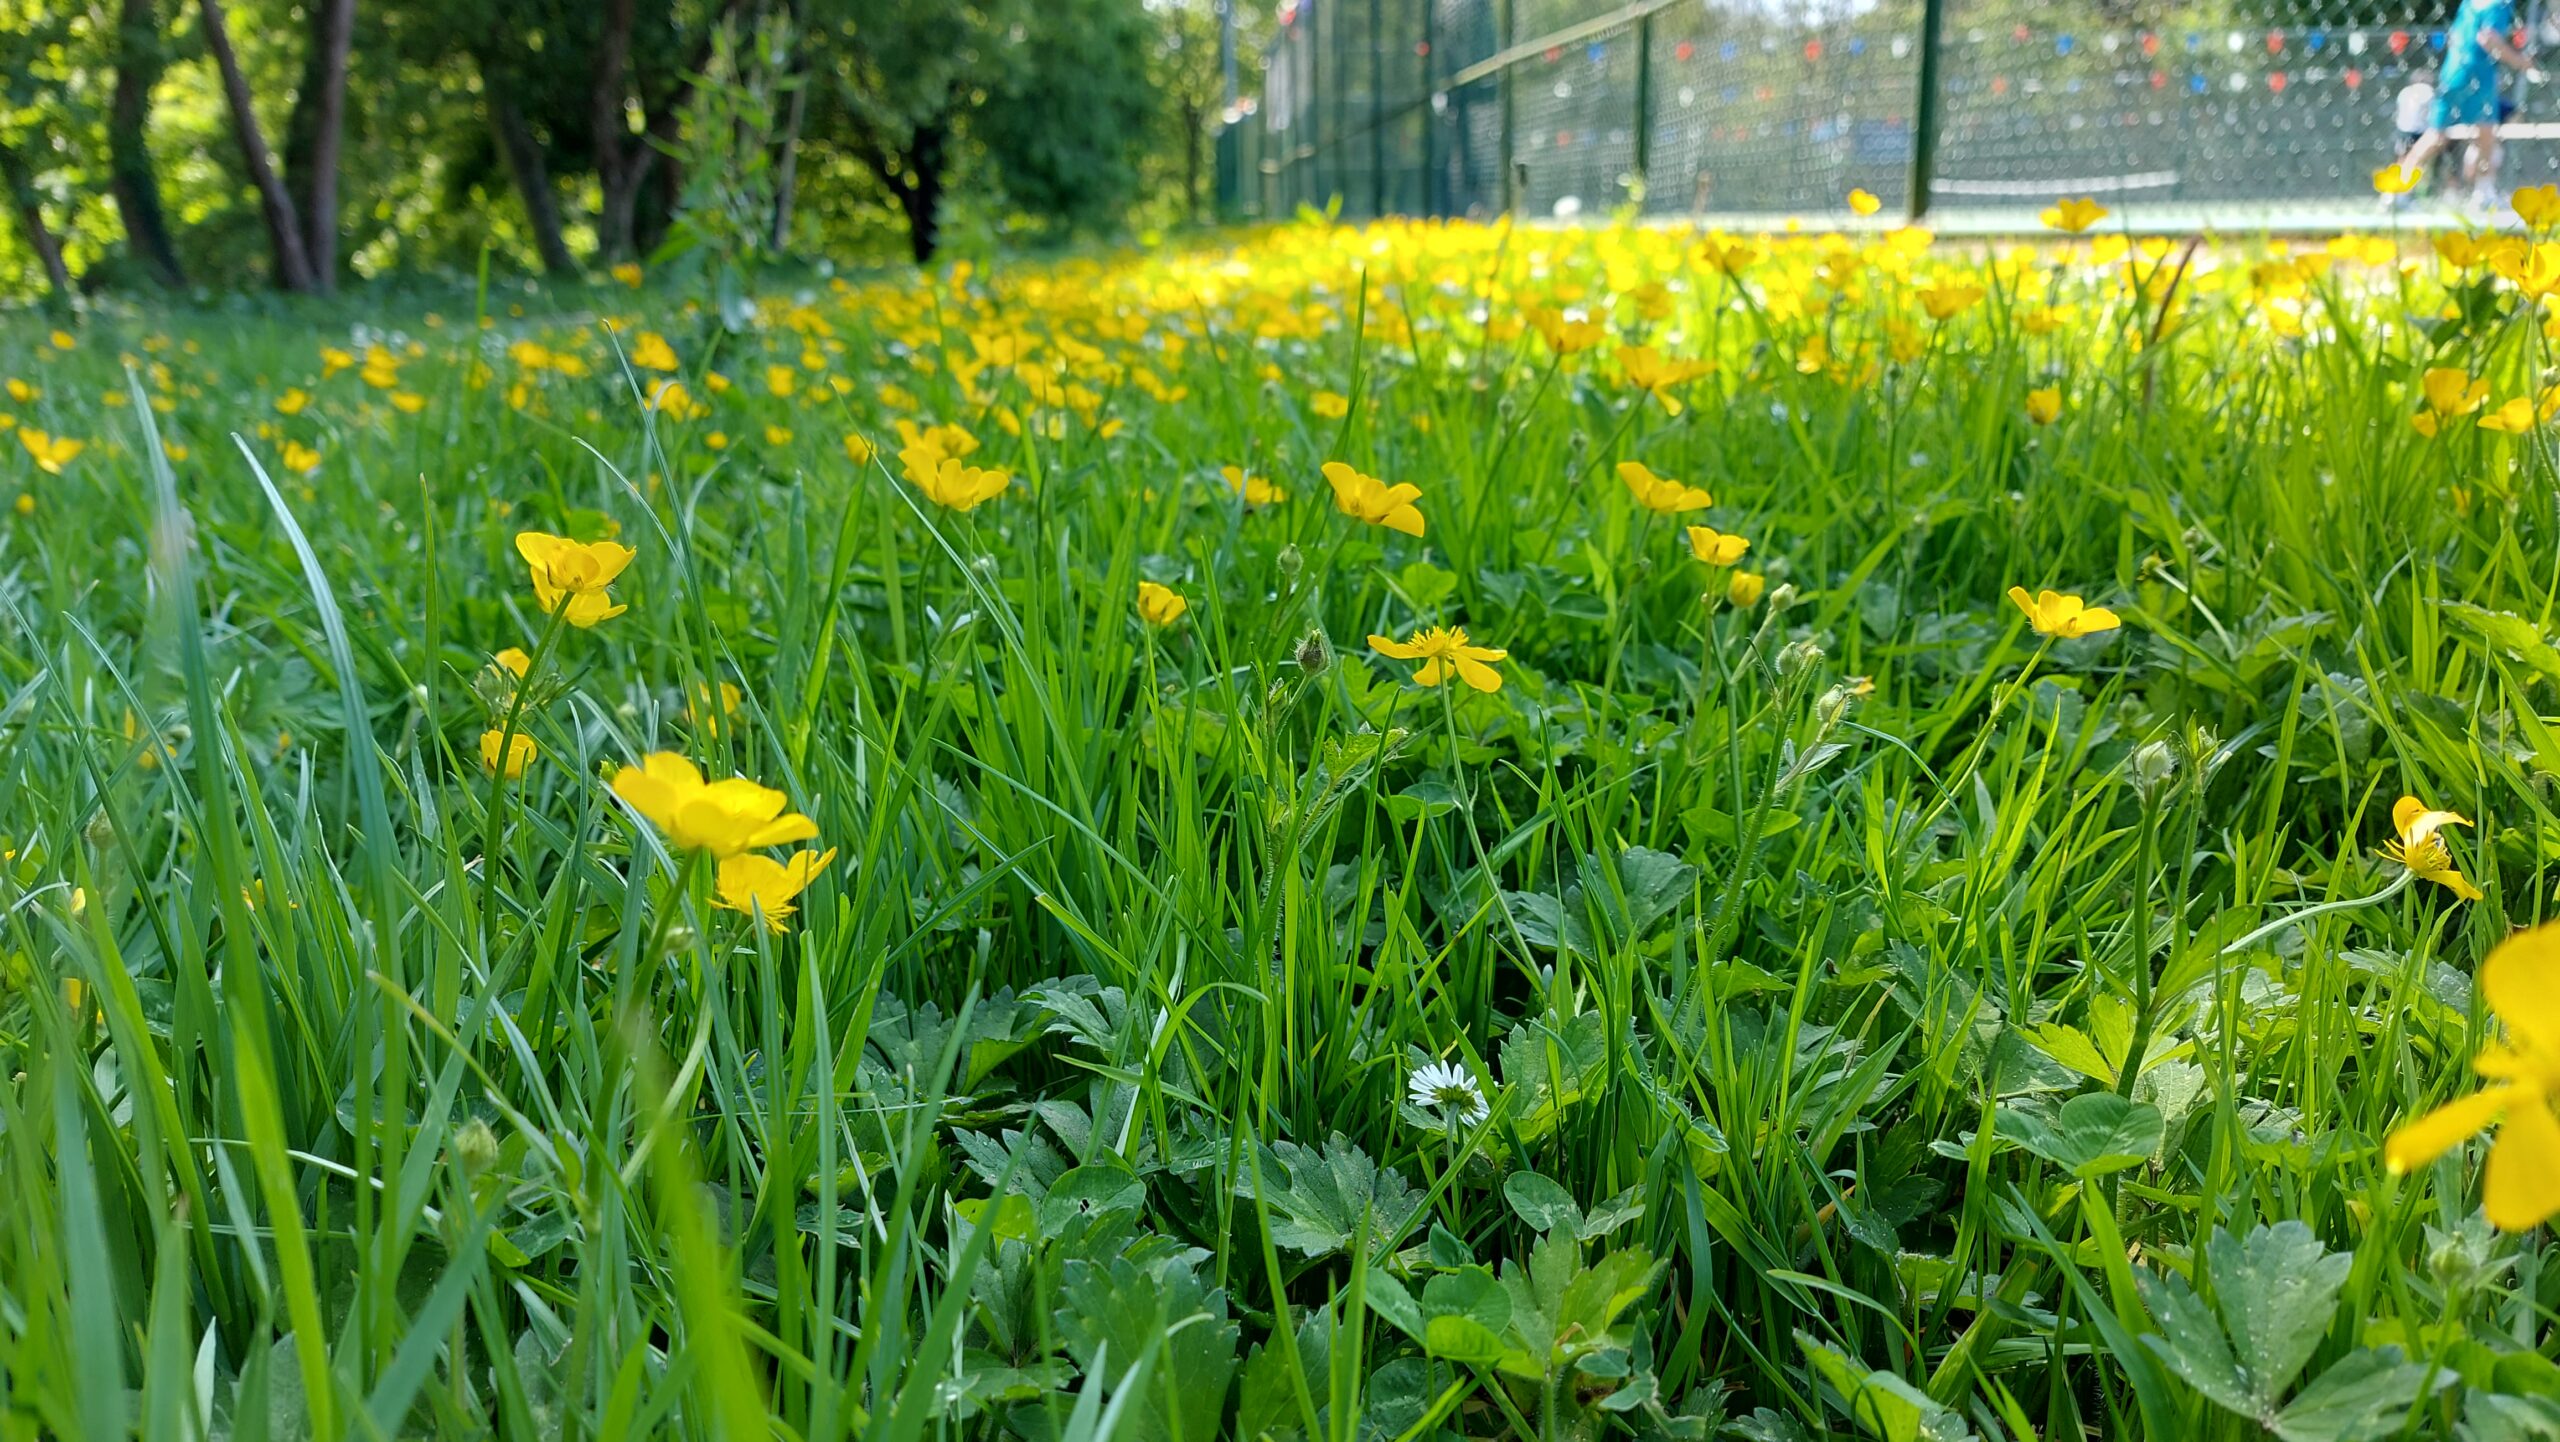 No Mow May area in Penlee Park (beside the tennis courts)